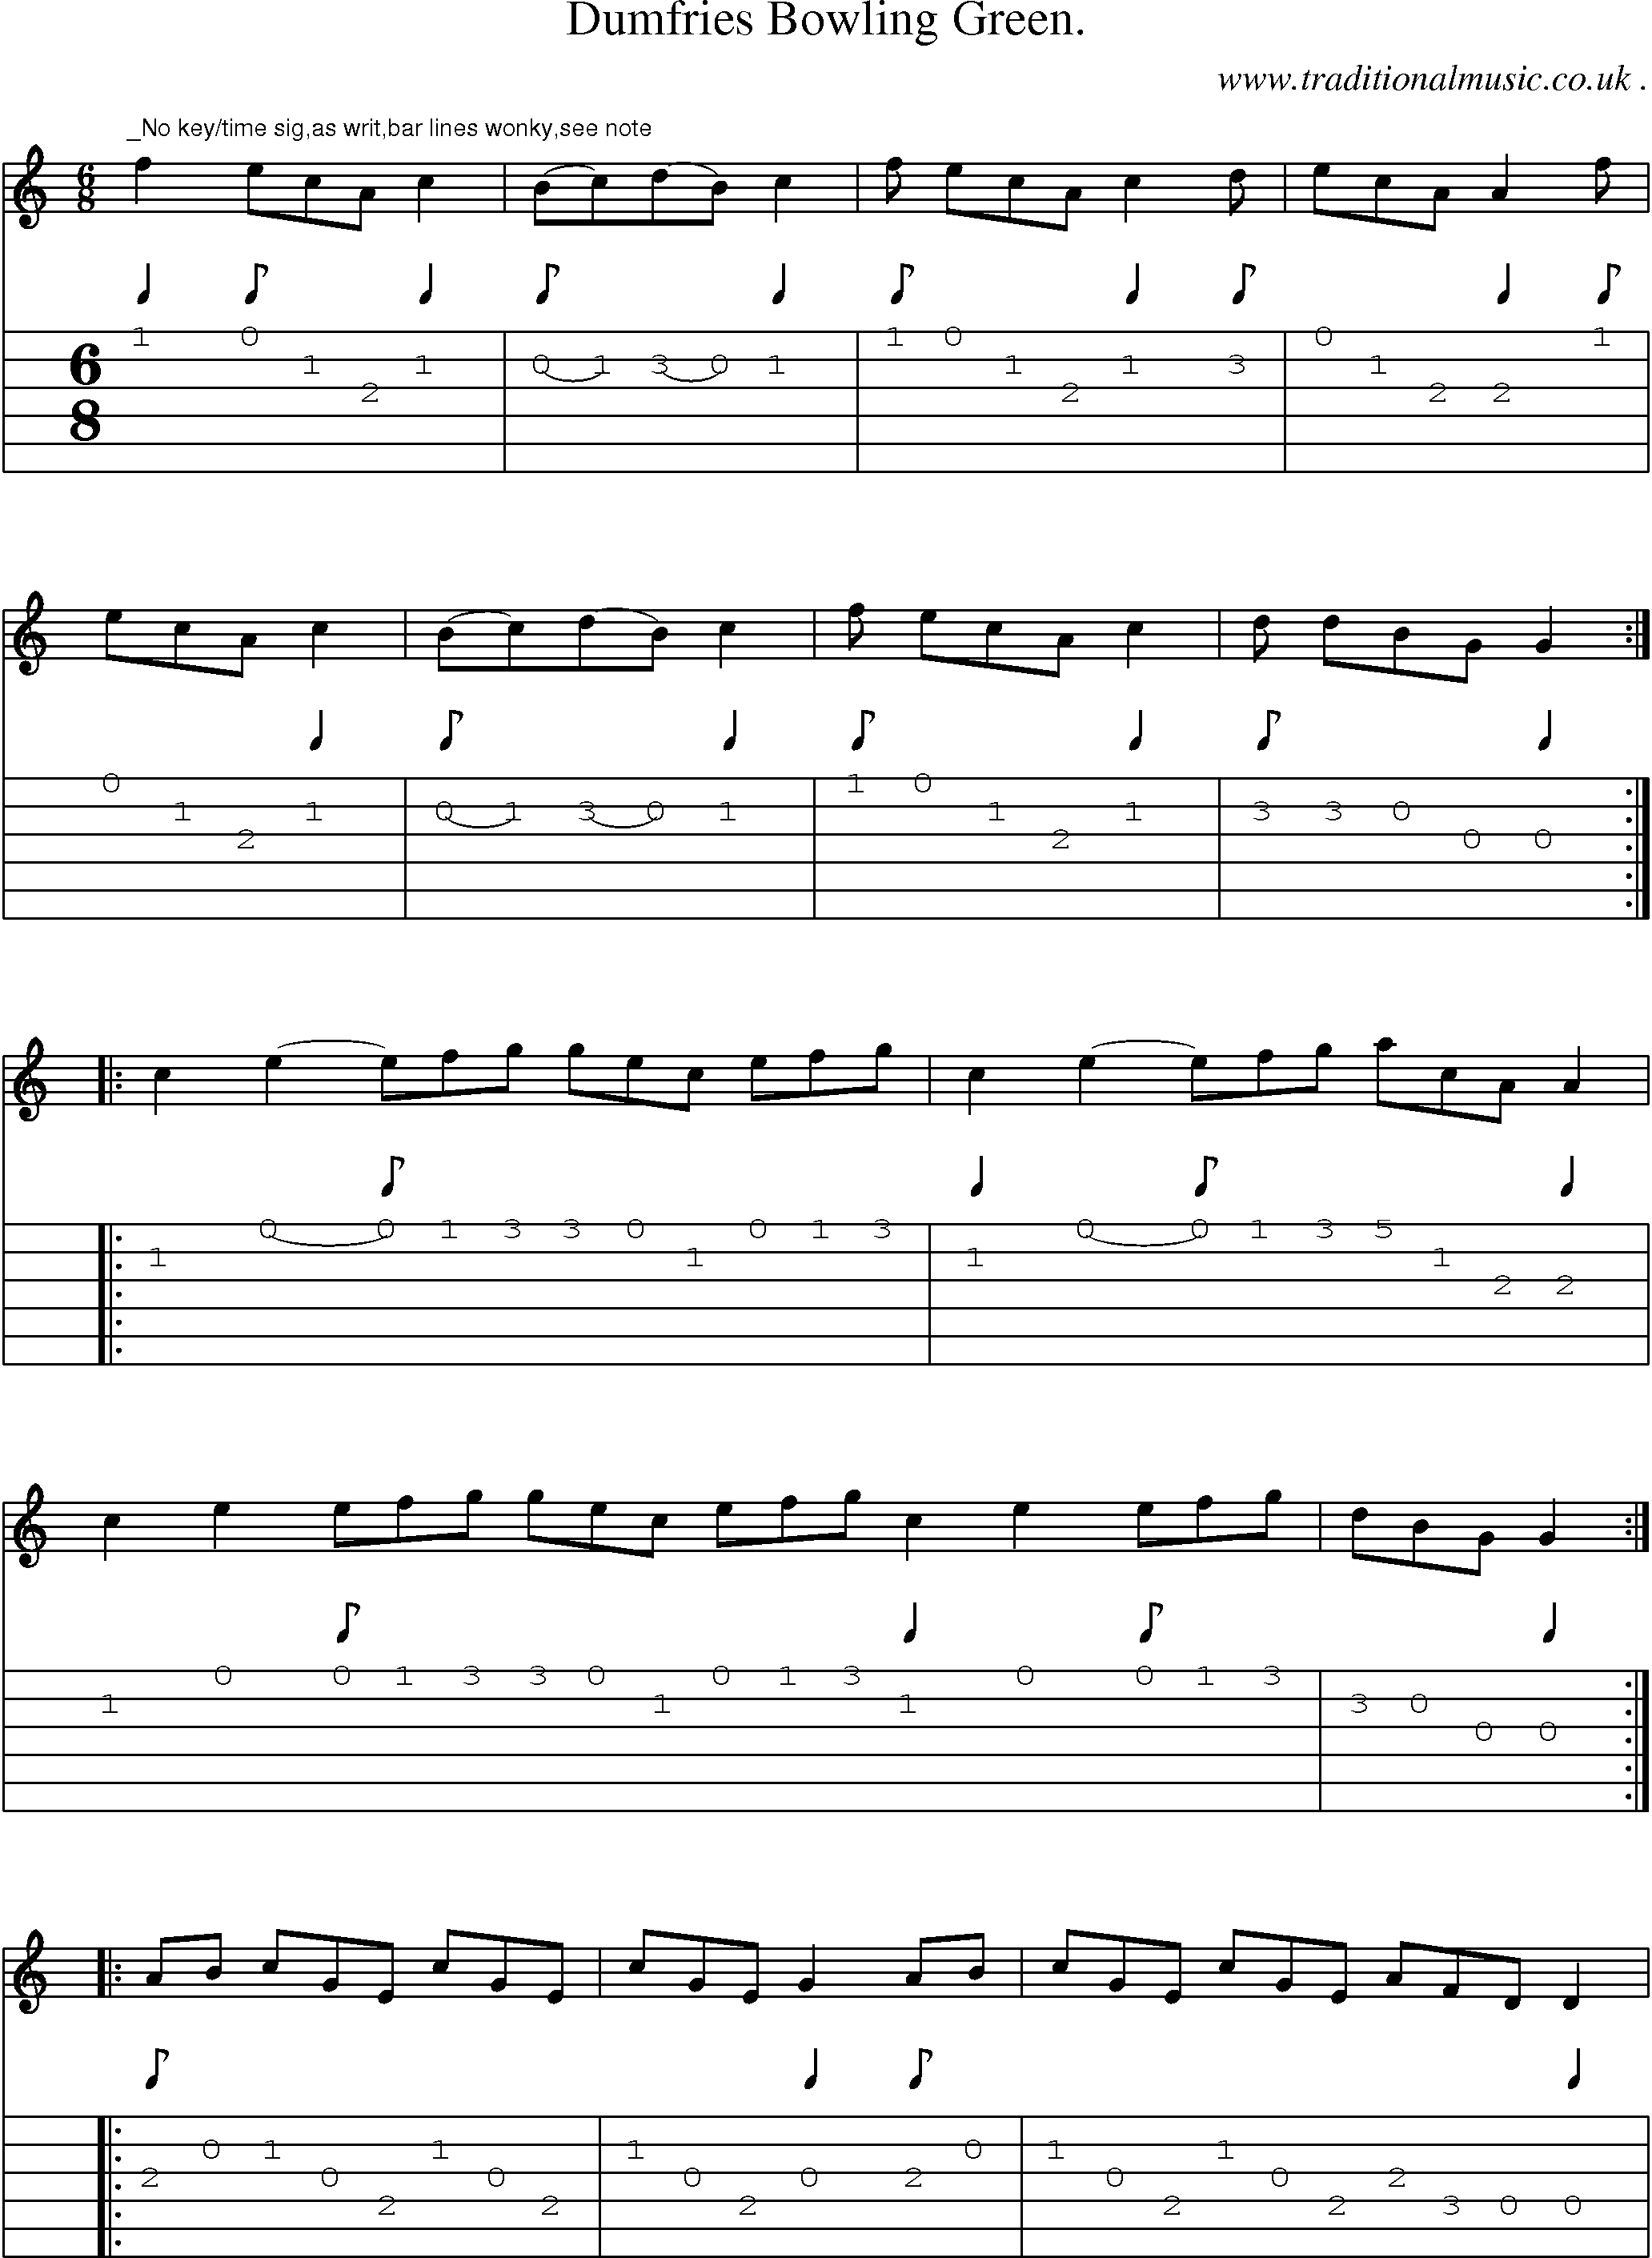 Sheet-Music and Guitar Tabs for Dumfries Bowling Green